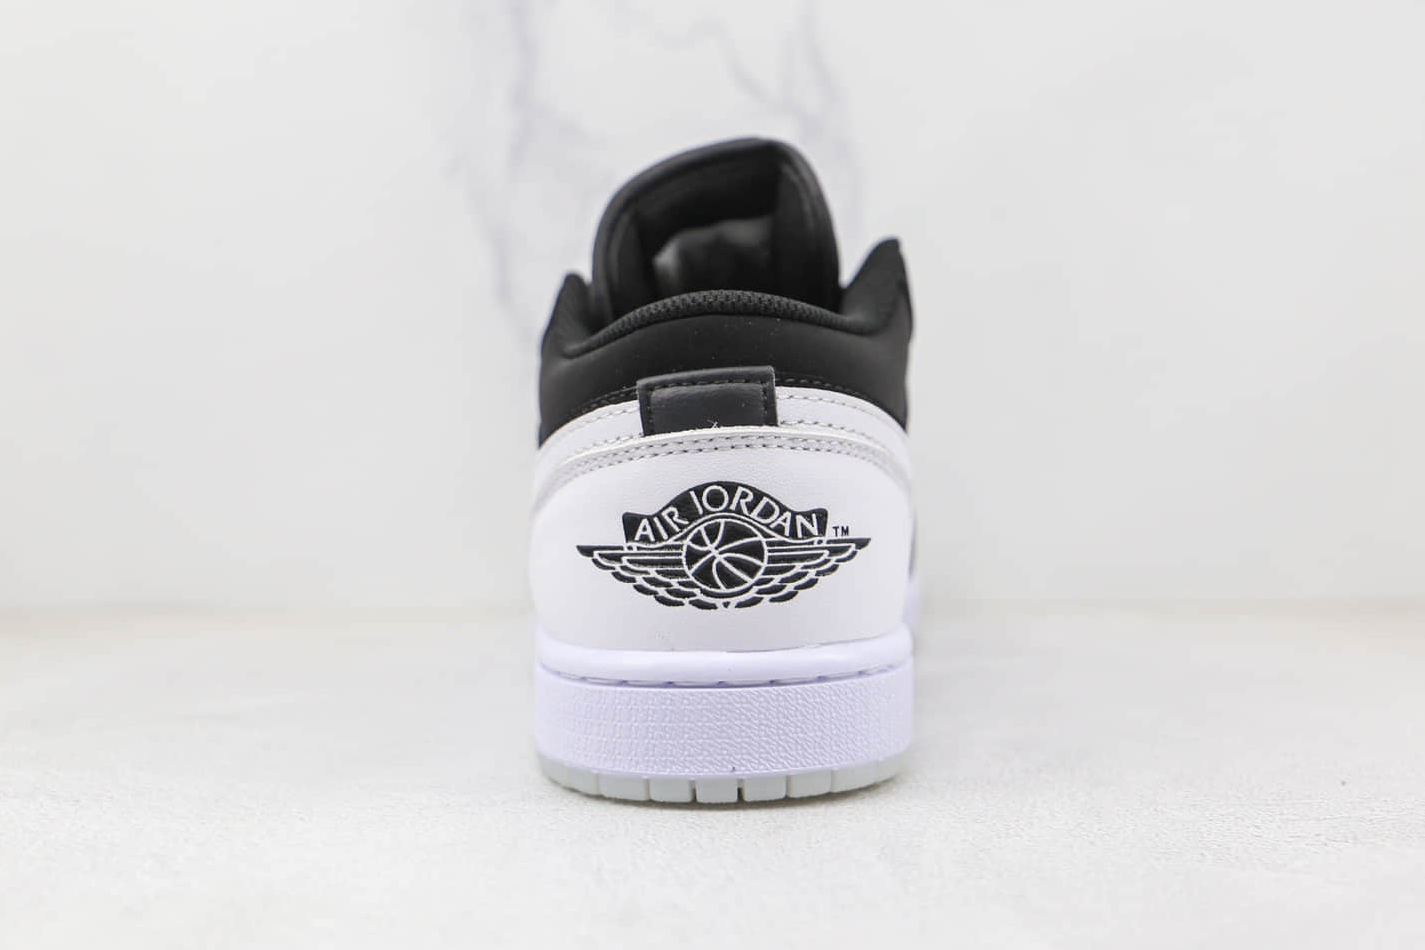 Air Jordan 1 Low SE 'Diamond' DH6931-001 for Iconic Style